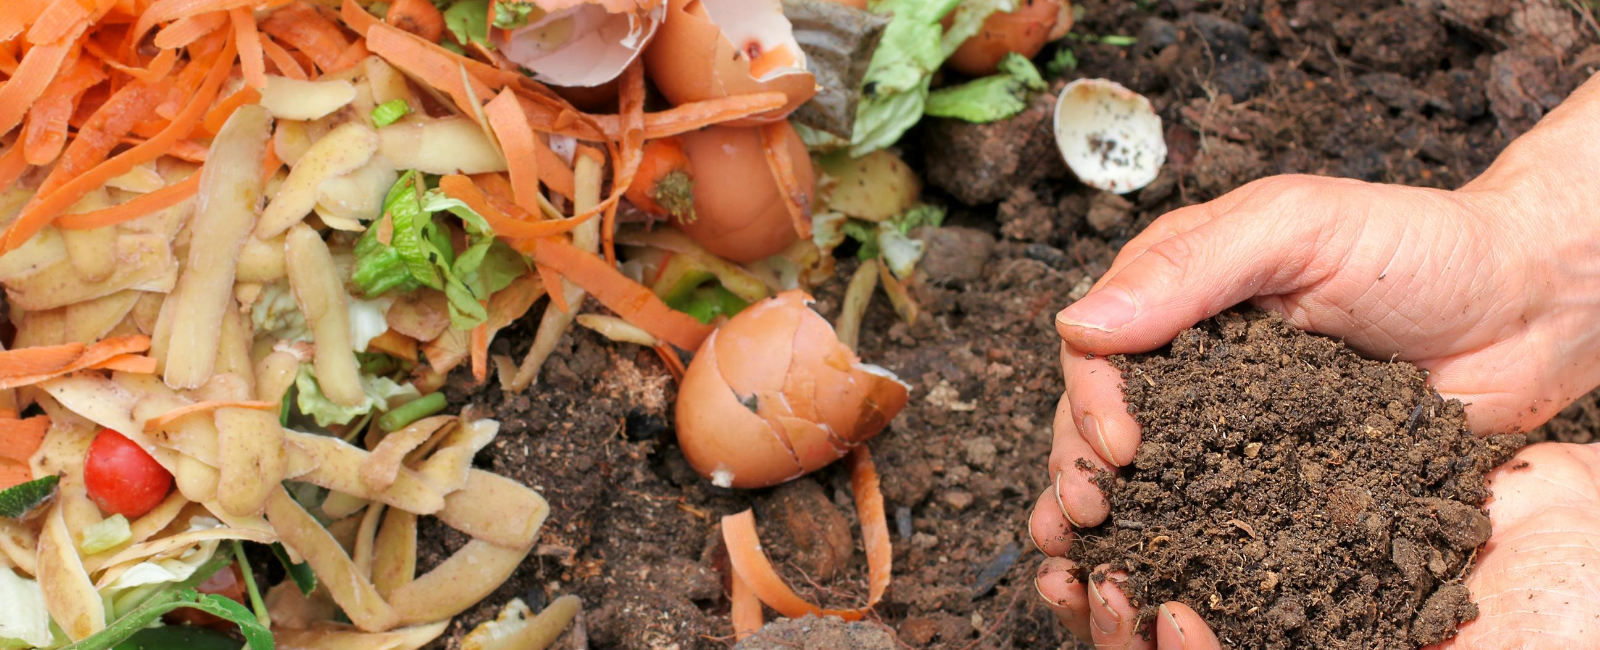 Photo of hand holding compost above food scraps